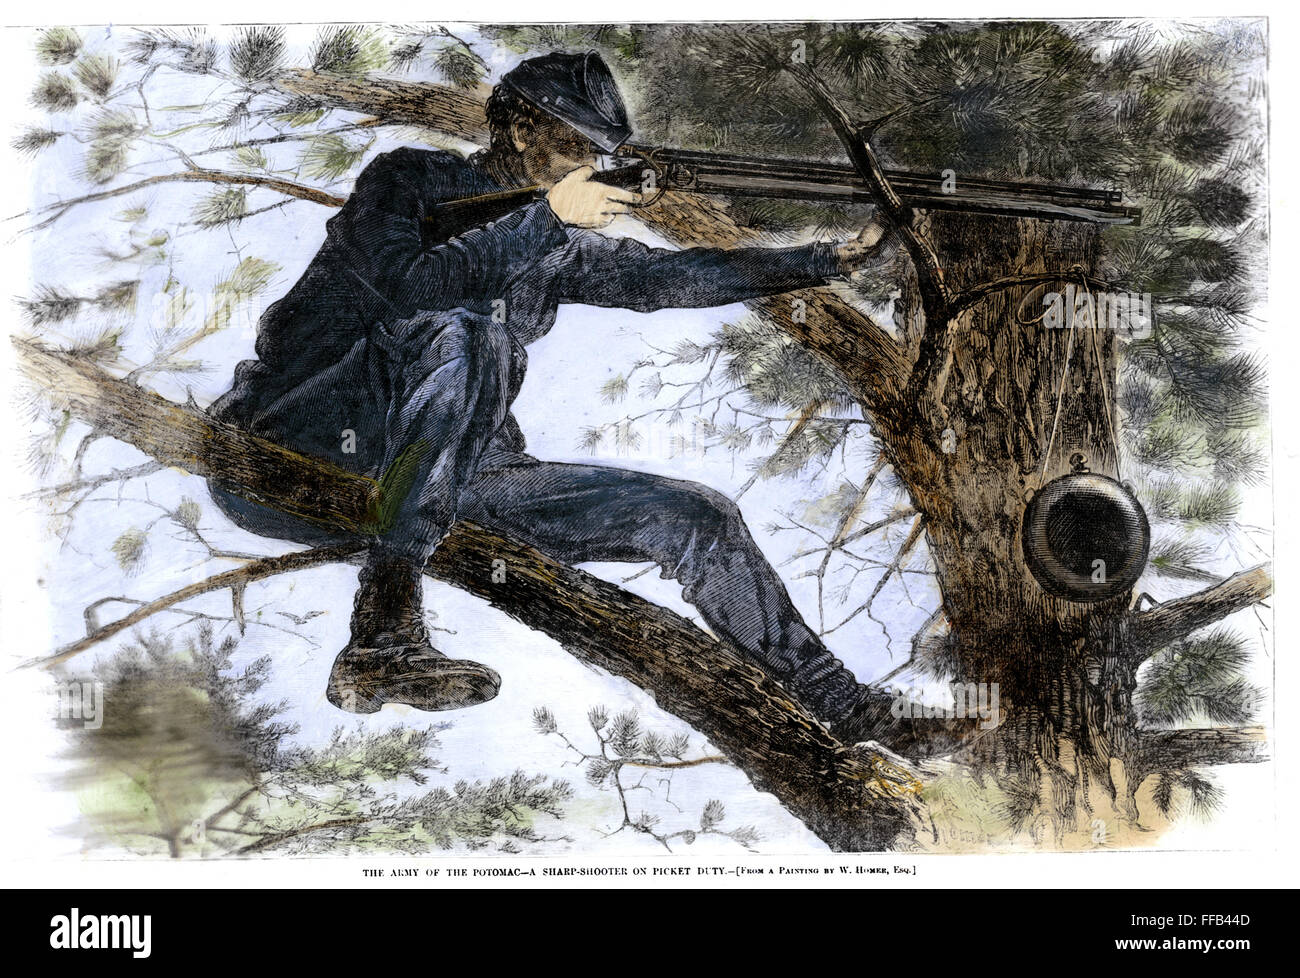 HOMER: CIVIL WAR, 1862. /nA Union sharpshooter on picket duty. Colored engraving, 1862, after a painting by Winslow Homer. Stock Photo